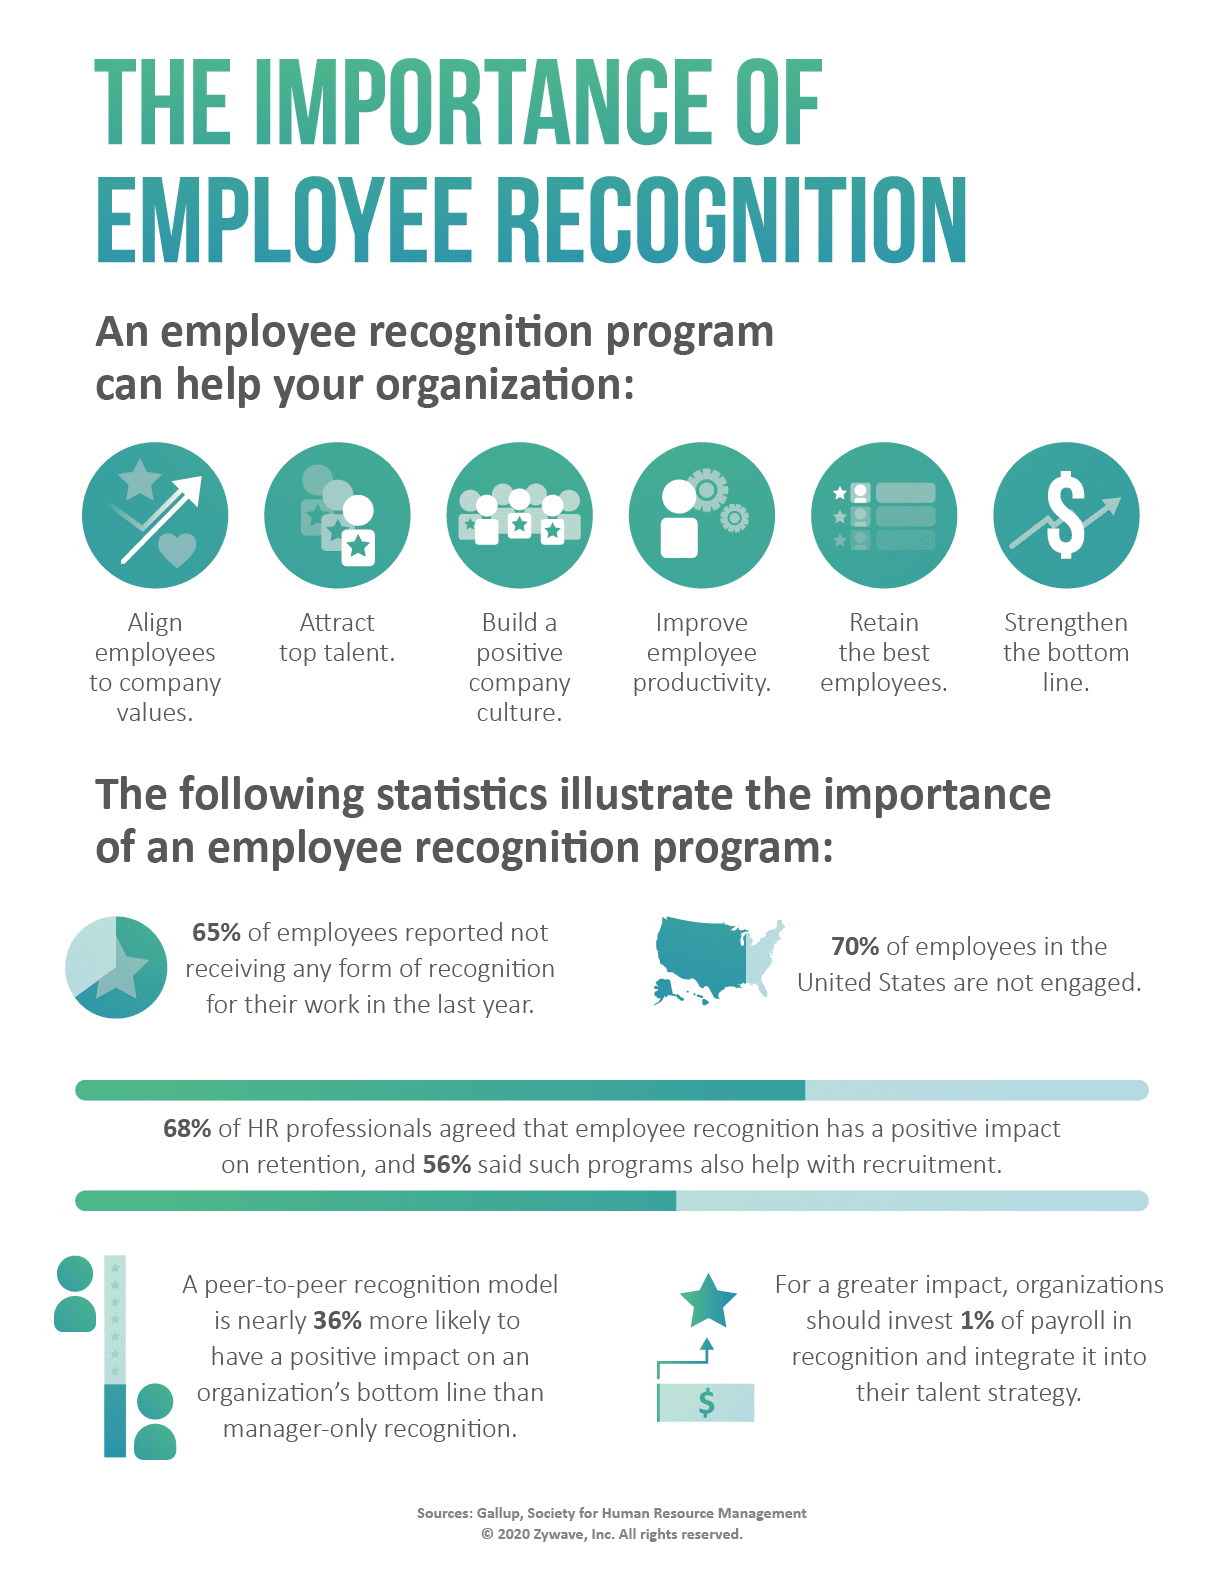 Importance of employee recognition programs